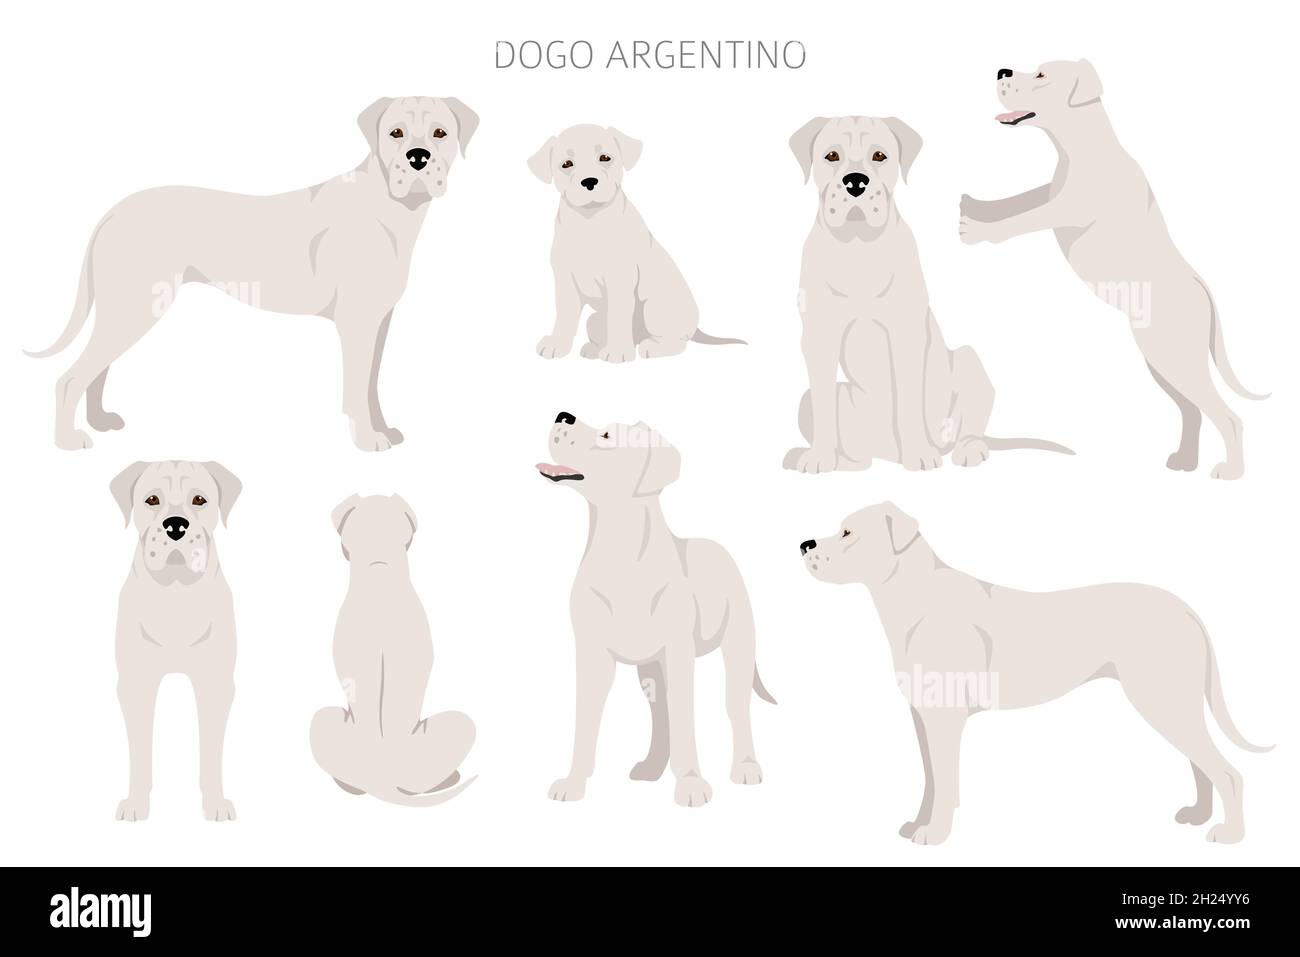 Dogo Argentino clipart. Different poses, coat colors set.  Vector illustration Stock Vector